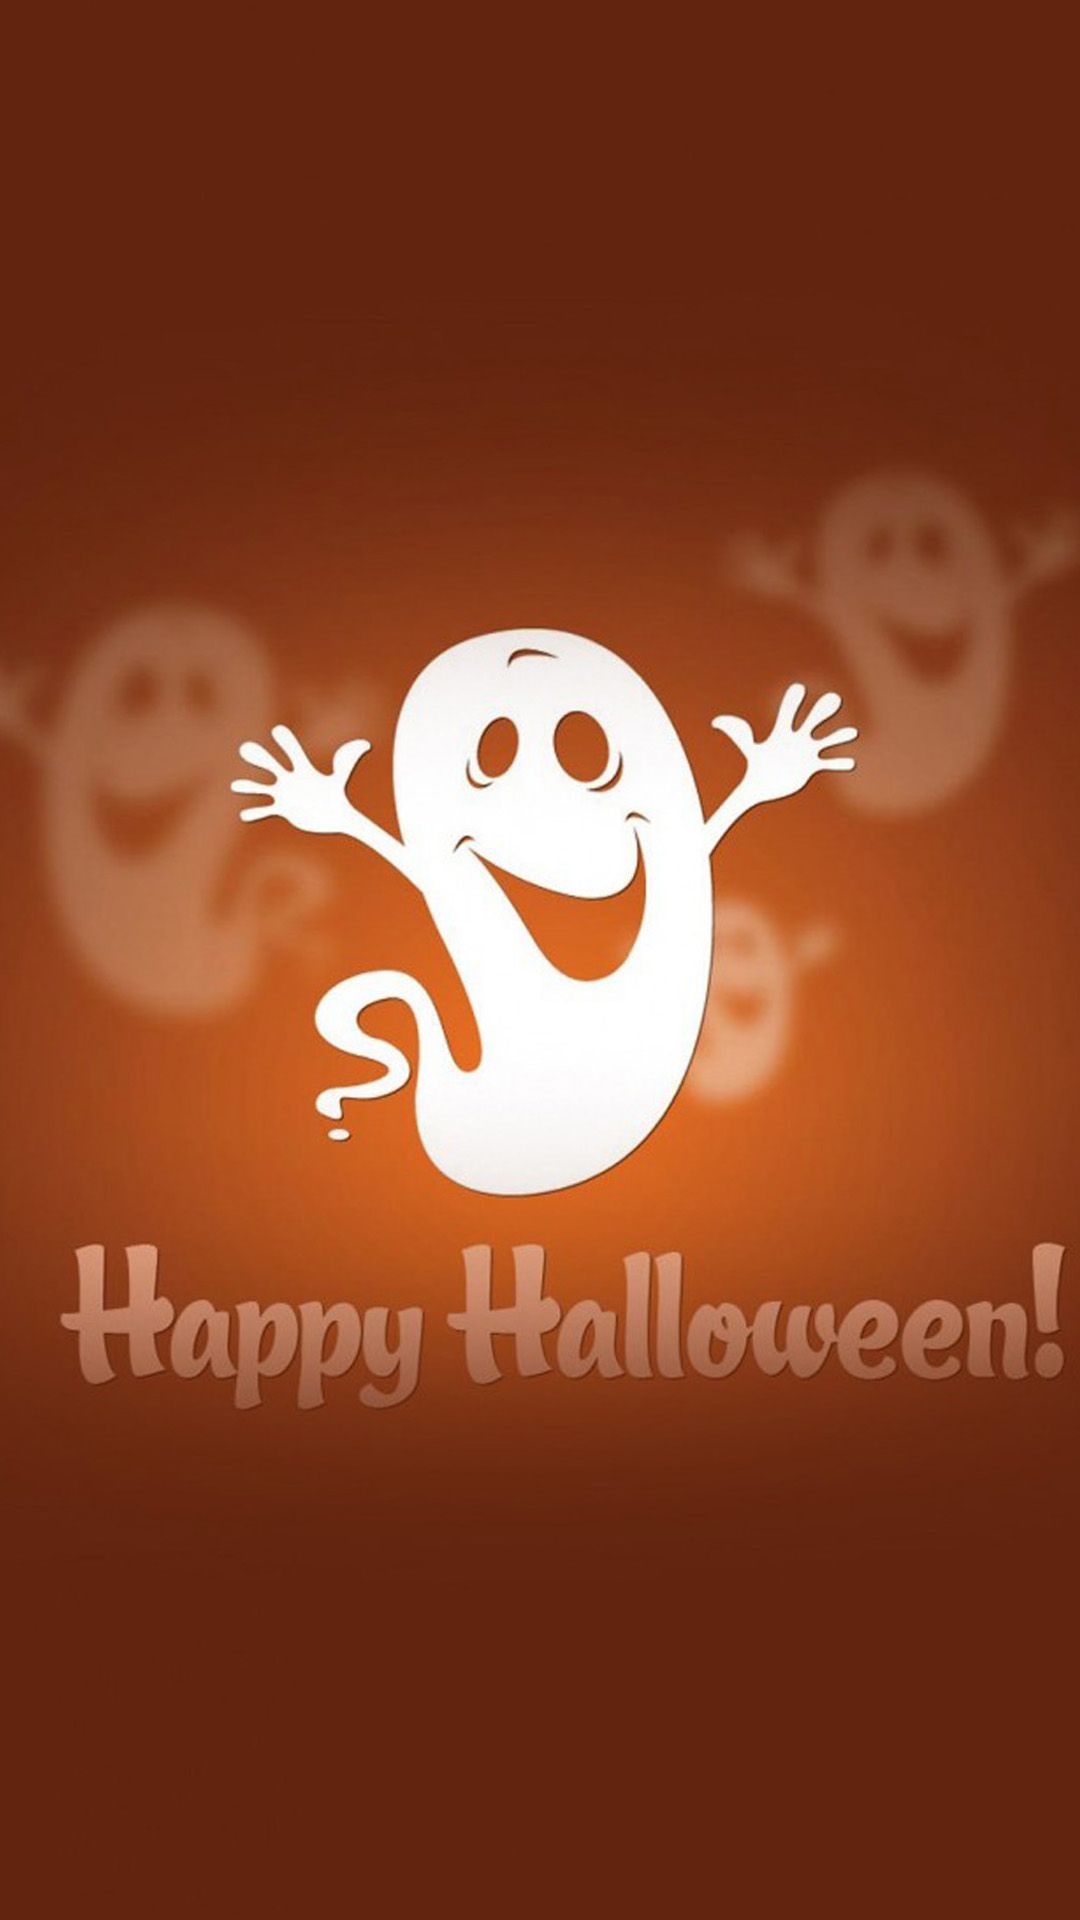 Free Holiday Samsung Wallpaper 5. Halloween facebook cover, Happy halloween, Halloween coloring pages